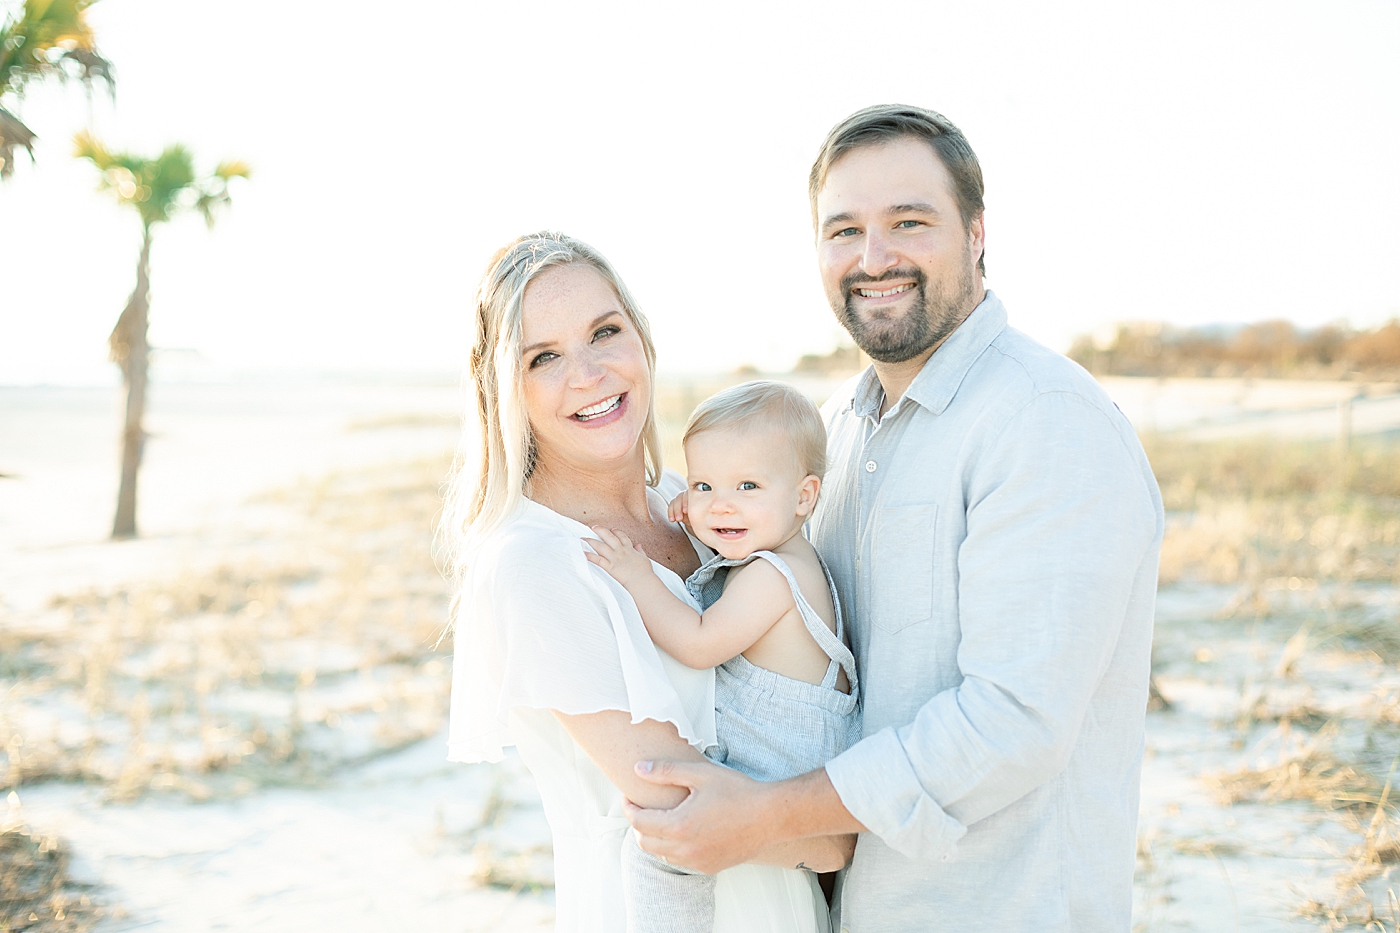 Family portrait at sunset on the beach. Photo by Little Sunshine Photography.